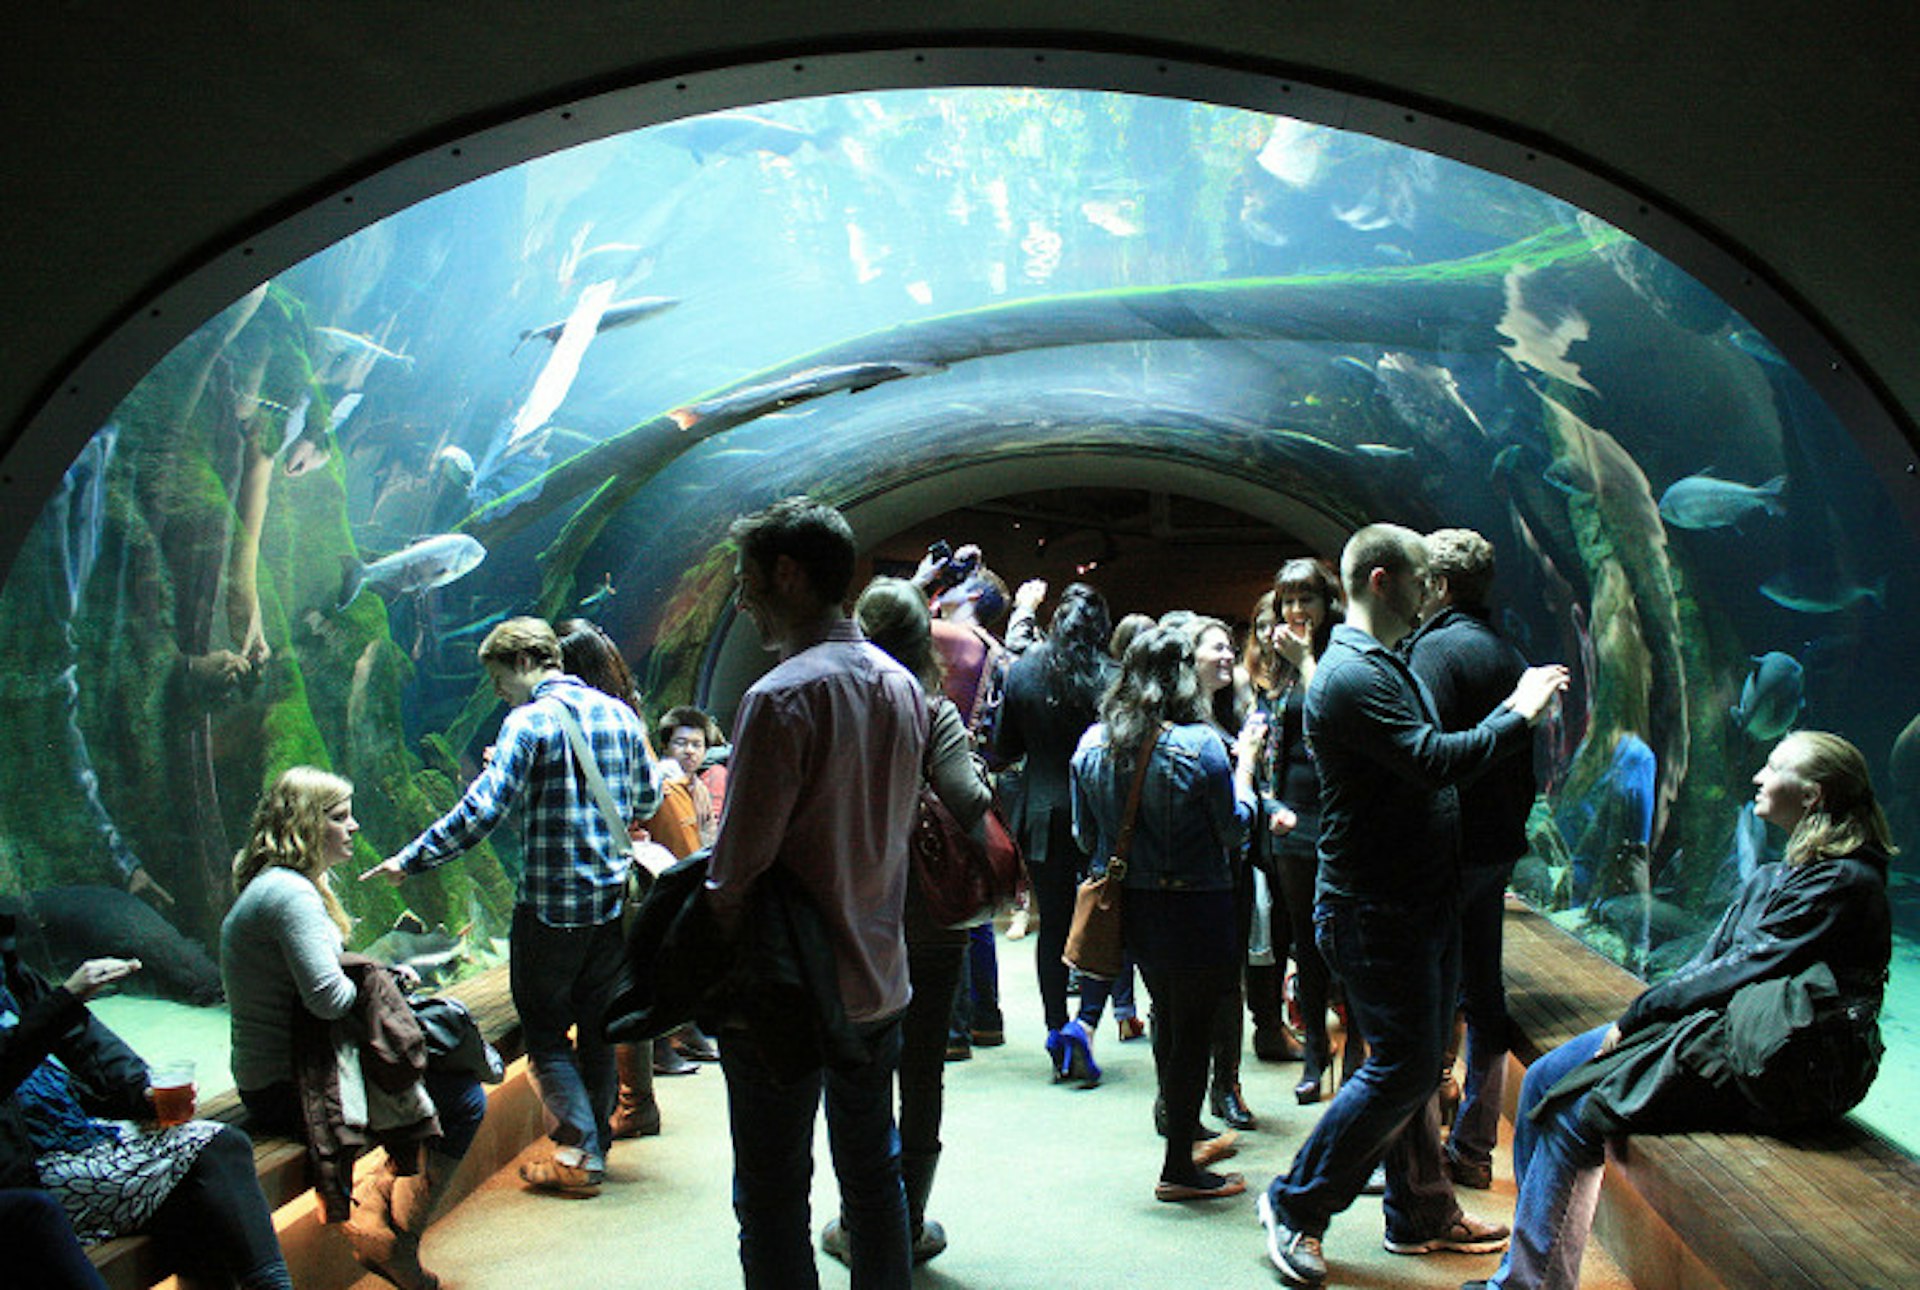 Underwater wonders at the California Academy of Sciences. Image by Kevin Gong / CC BY 2.0